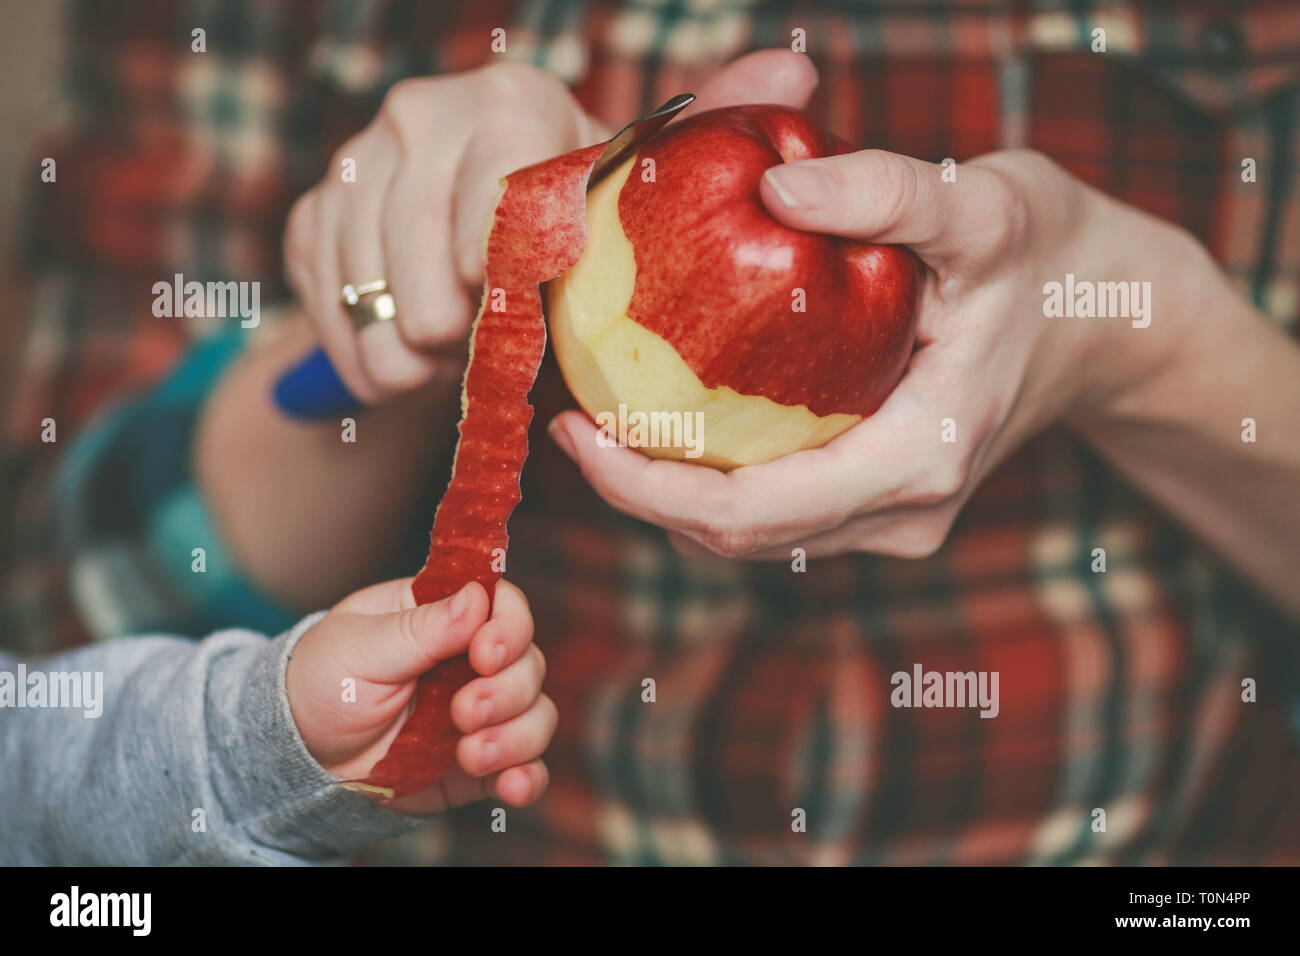 red juicy apples in their hands Stock Photo